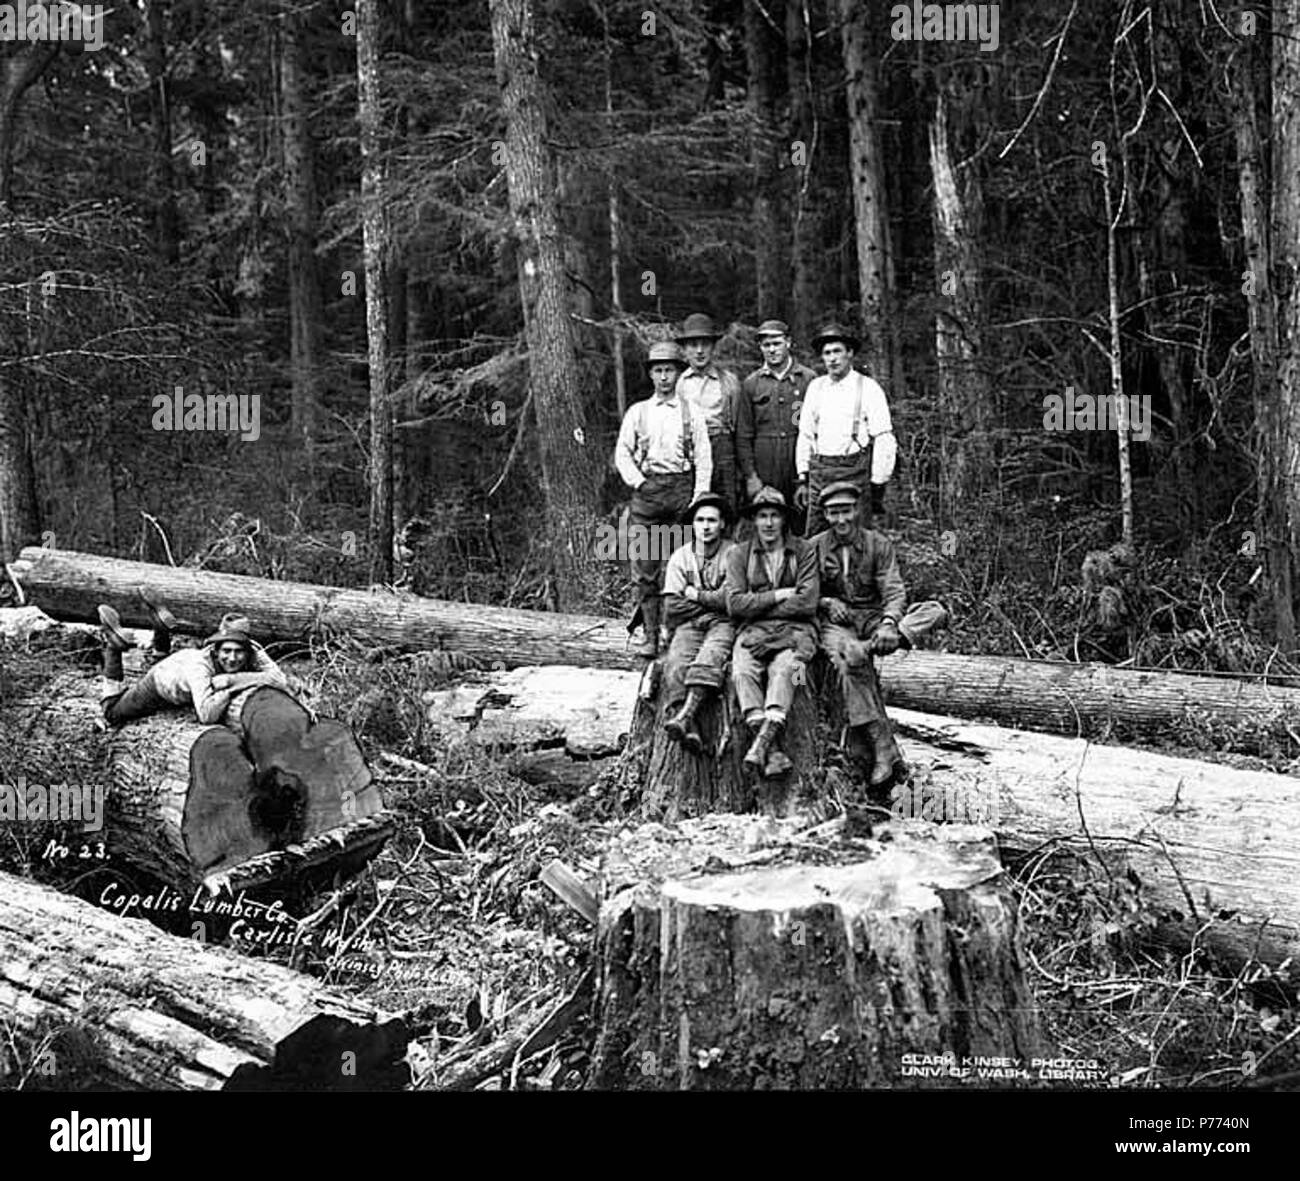 . English: Loggers in the woods, Copalis Lumber Company, near Carlisle, ca. 1917 . English: Caption on image: Copalis Lumber Co., Carlisle, Wash. C. Kinsey Photo, Seattle. No. 23 PH Coll 516.810 The Copalis Lumber Company was in business in Carlisle from 1914 to 1920. It's logging railroad was absorbed into the Carlisle Lumber Company. Carlisle is a small settlement on the Copalis River four miles east of the Pacific Ocean in southwest Grays Harbor County. When established in 1912 by the Carlisle Lumber Company, it was a busy logging and sawmill center. It continued to be active until the comp Stock Photo